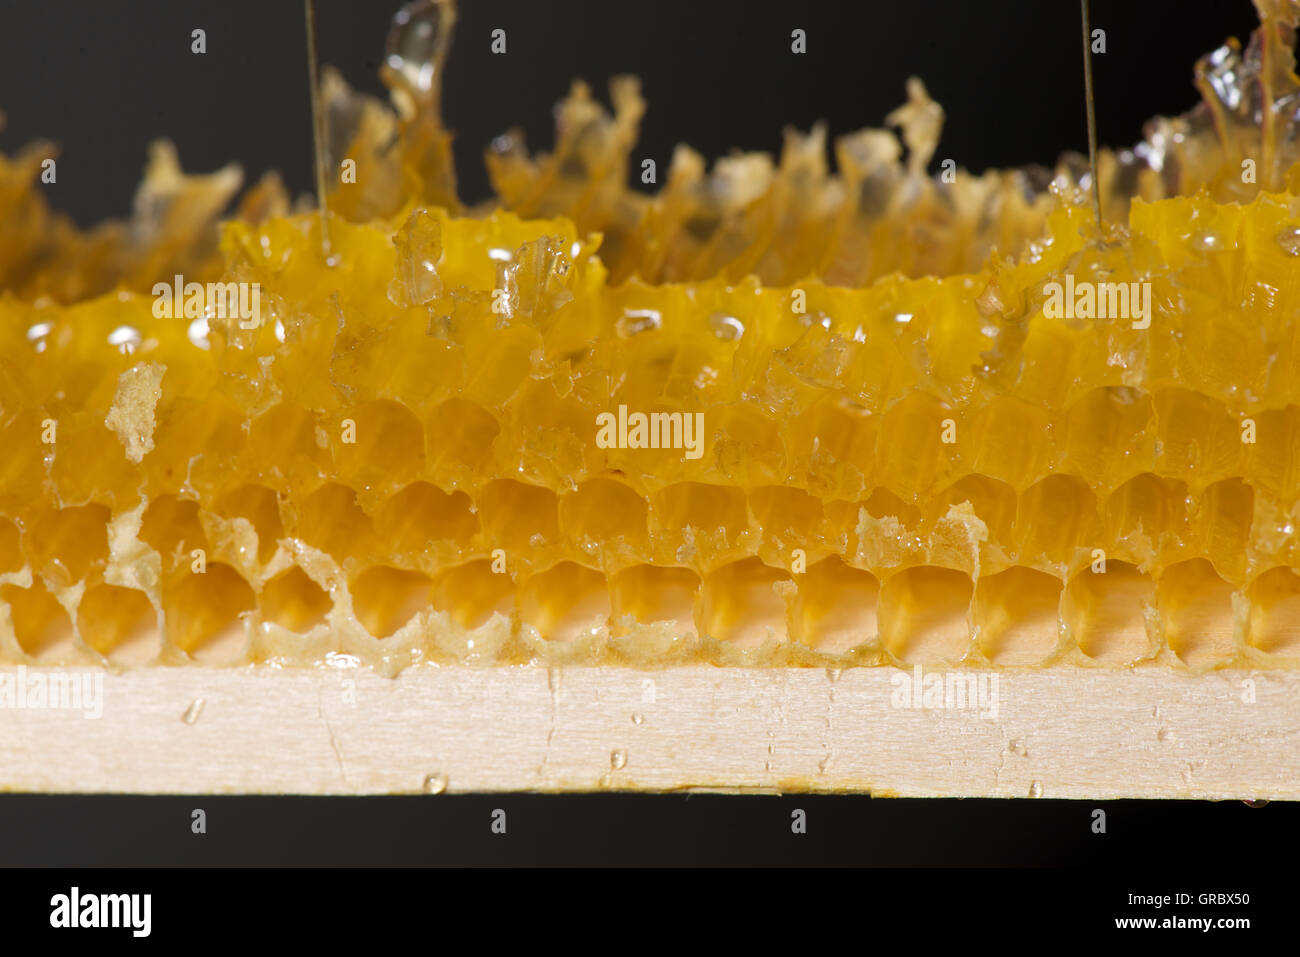 Honey Dripping Out Of Broken Honeycomb, Visible Cell Structure Stock Photo